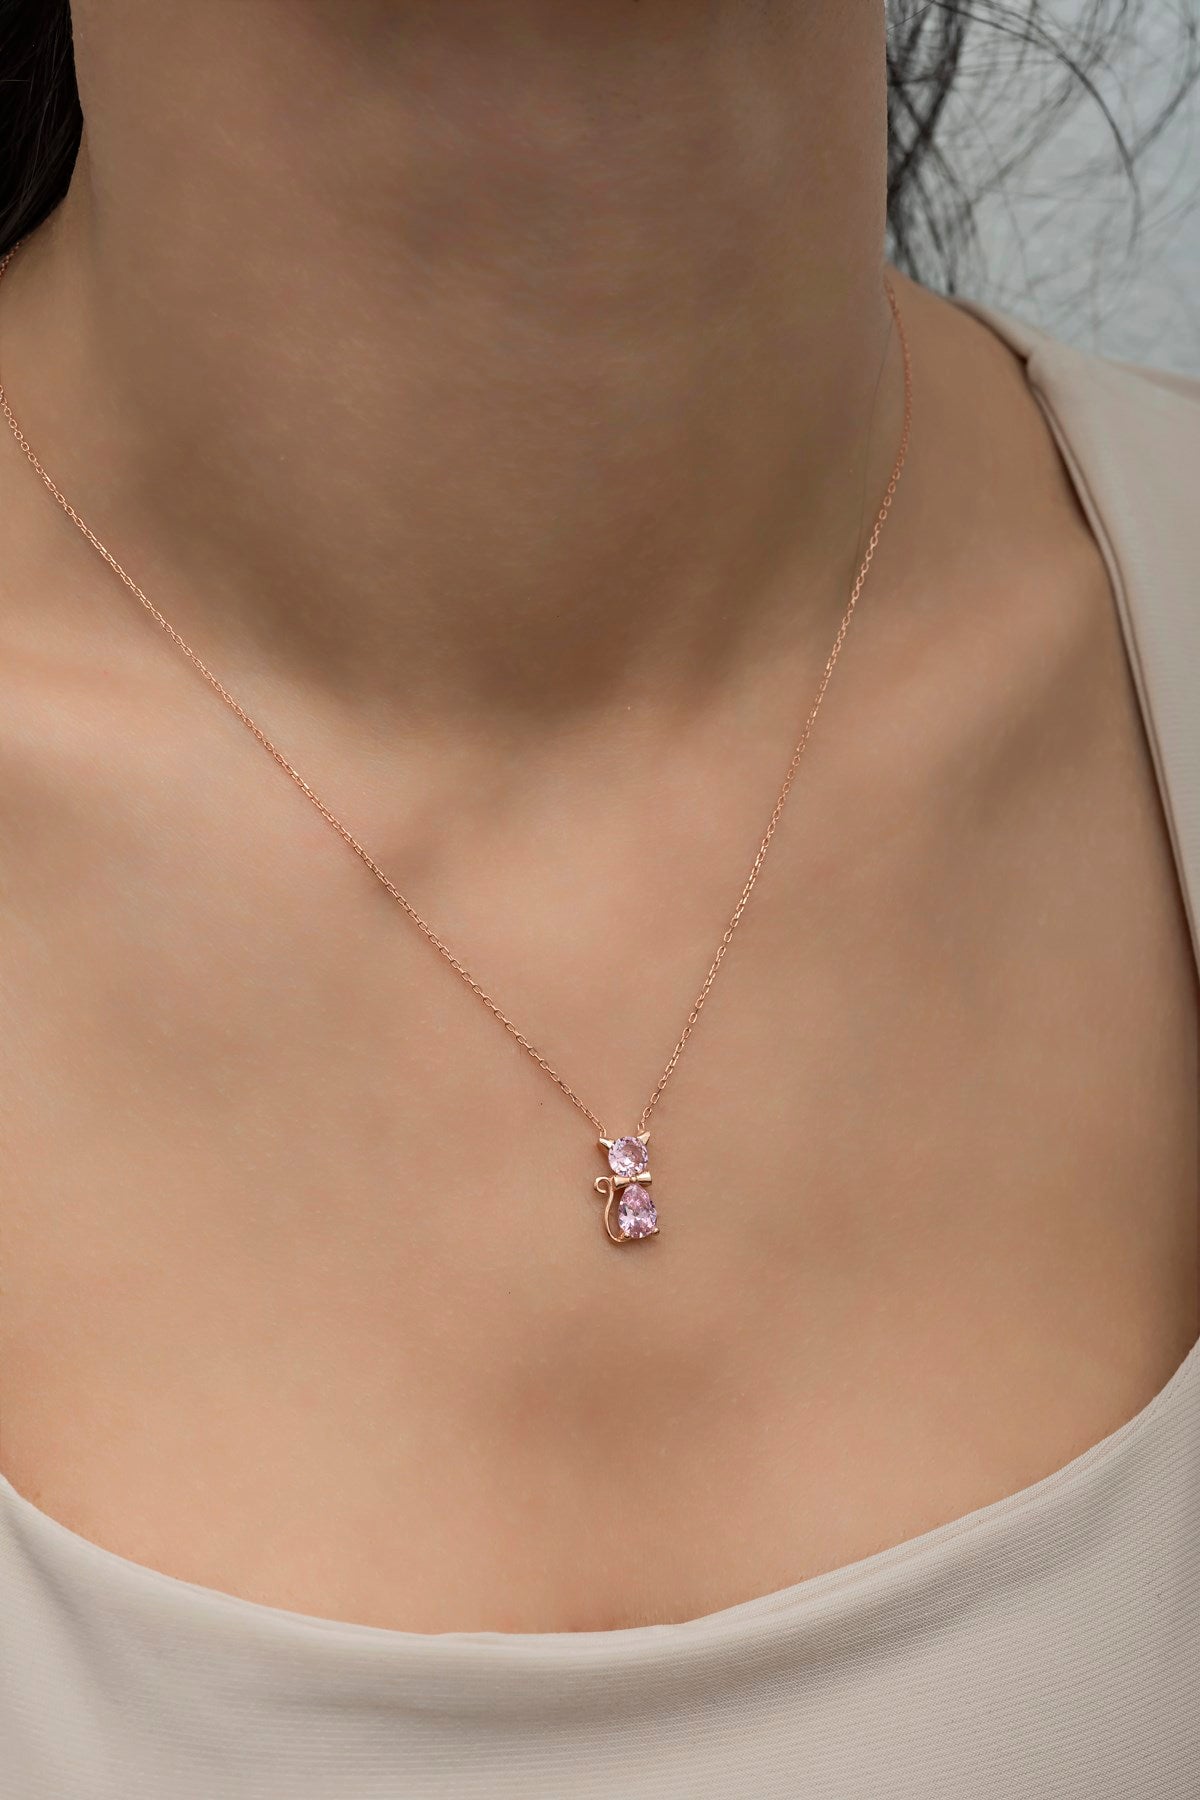 Pink Stone Cat Necklace